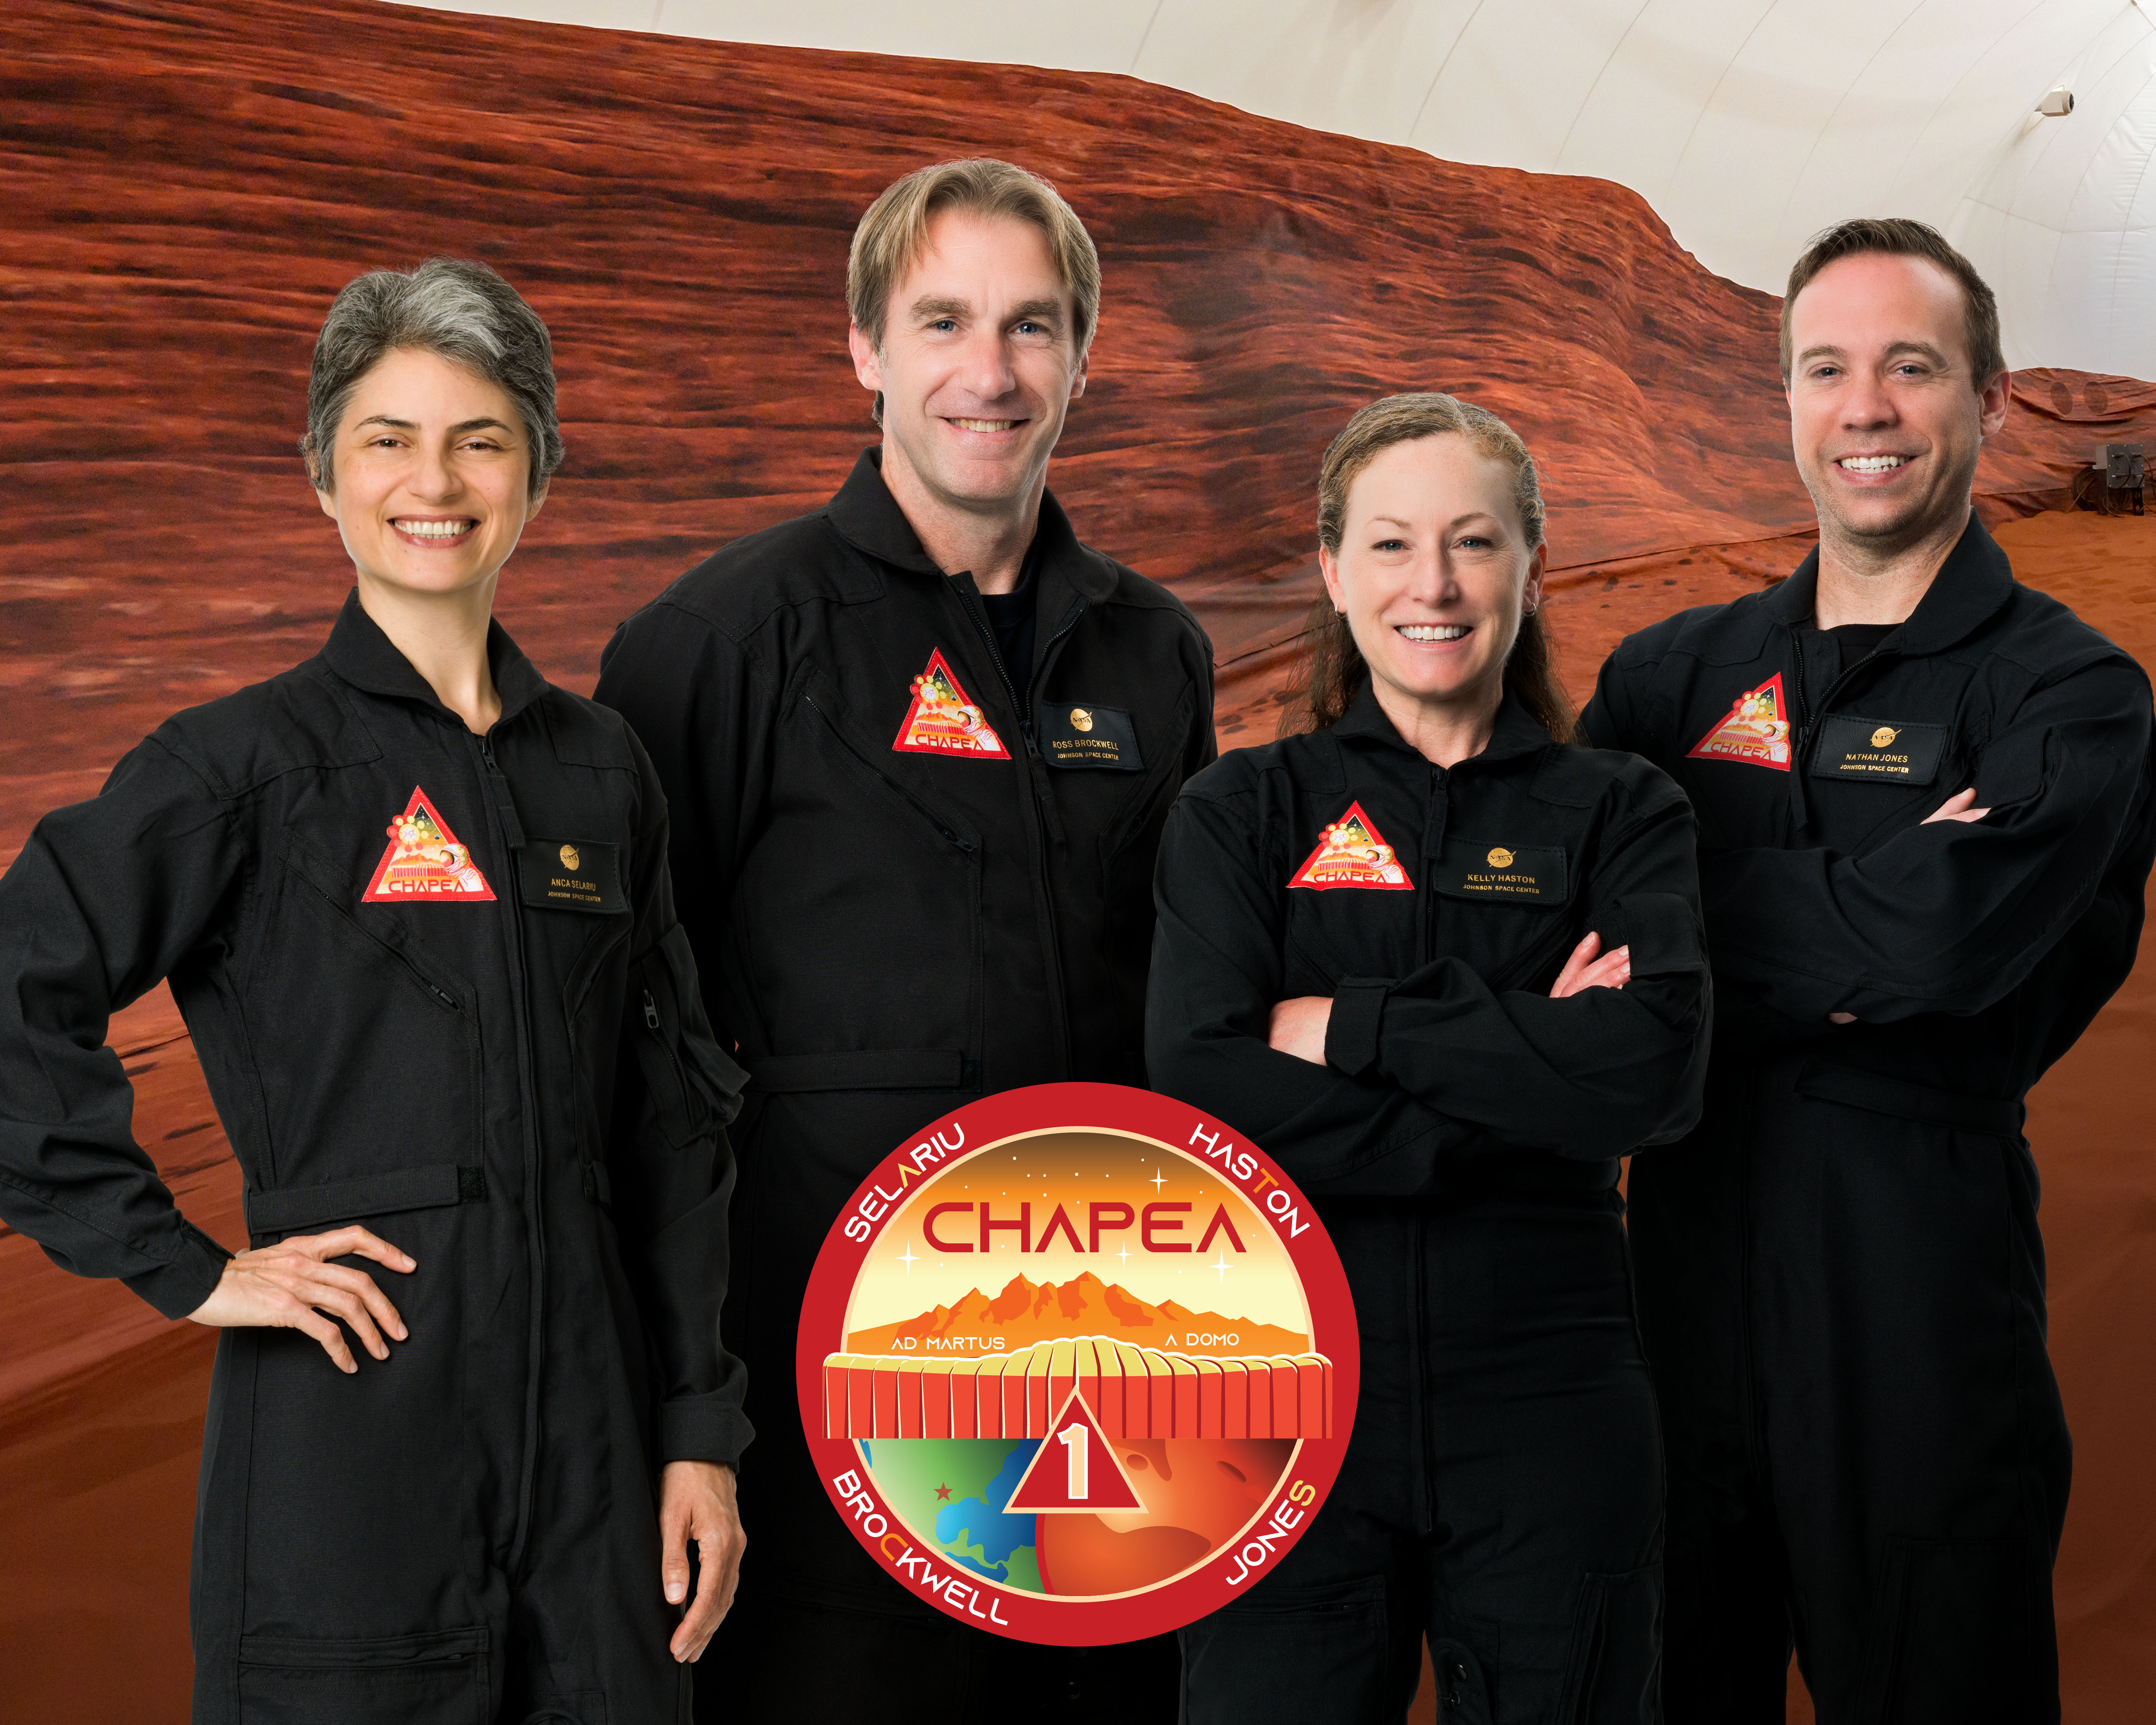 The CHAPEA Mission 1 crew with the official mission patch. (From left) Science Officer, Anca Selariu; Flight Engineer, Ross Brockwell, Commander, Kelly Haston, Medical Officer, Nathan Jones.